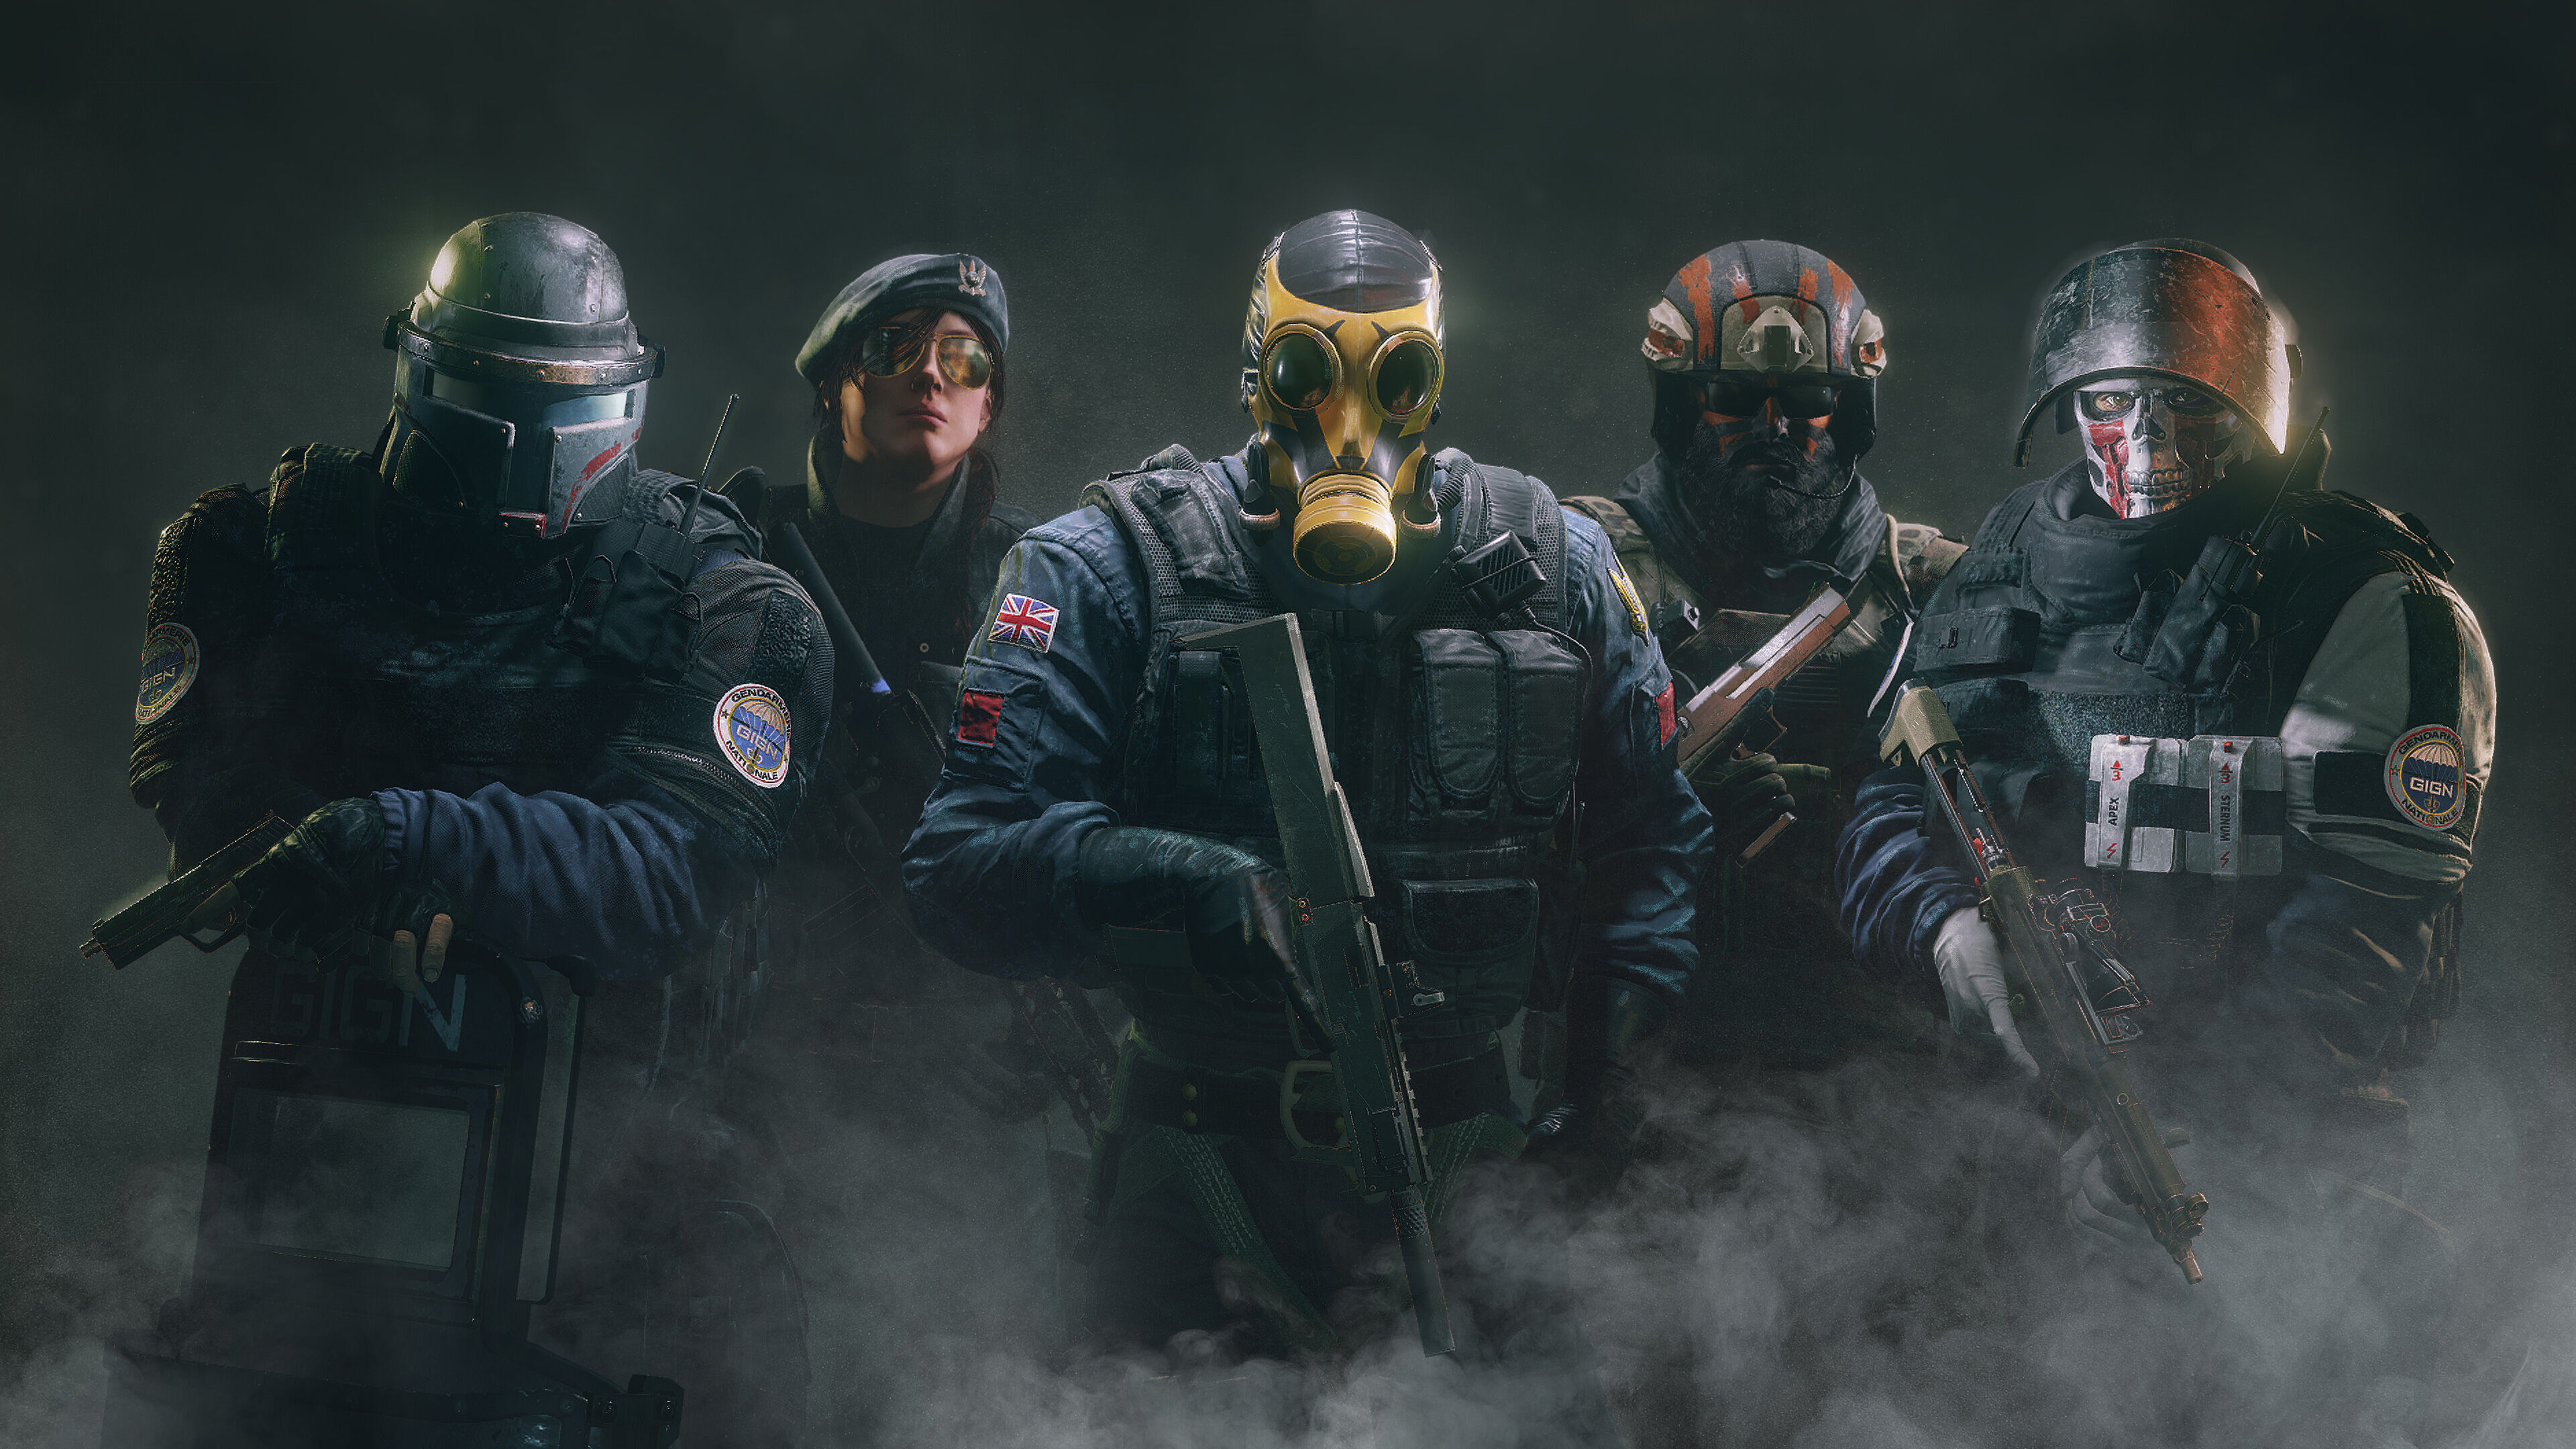 Rainbow Six Siege is still not working on Linux